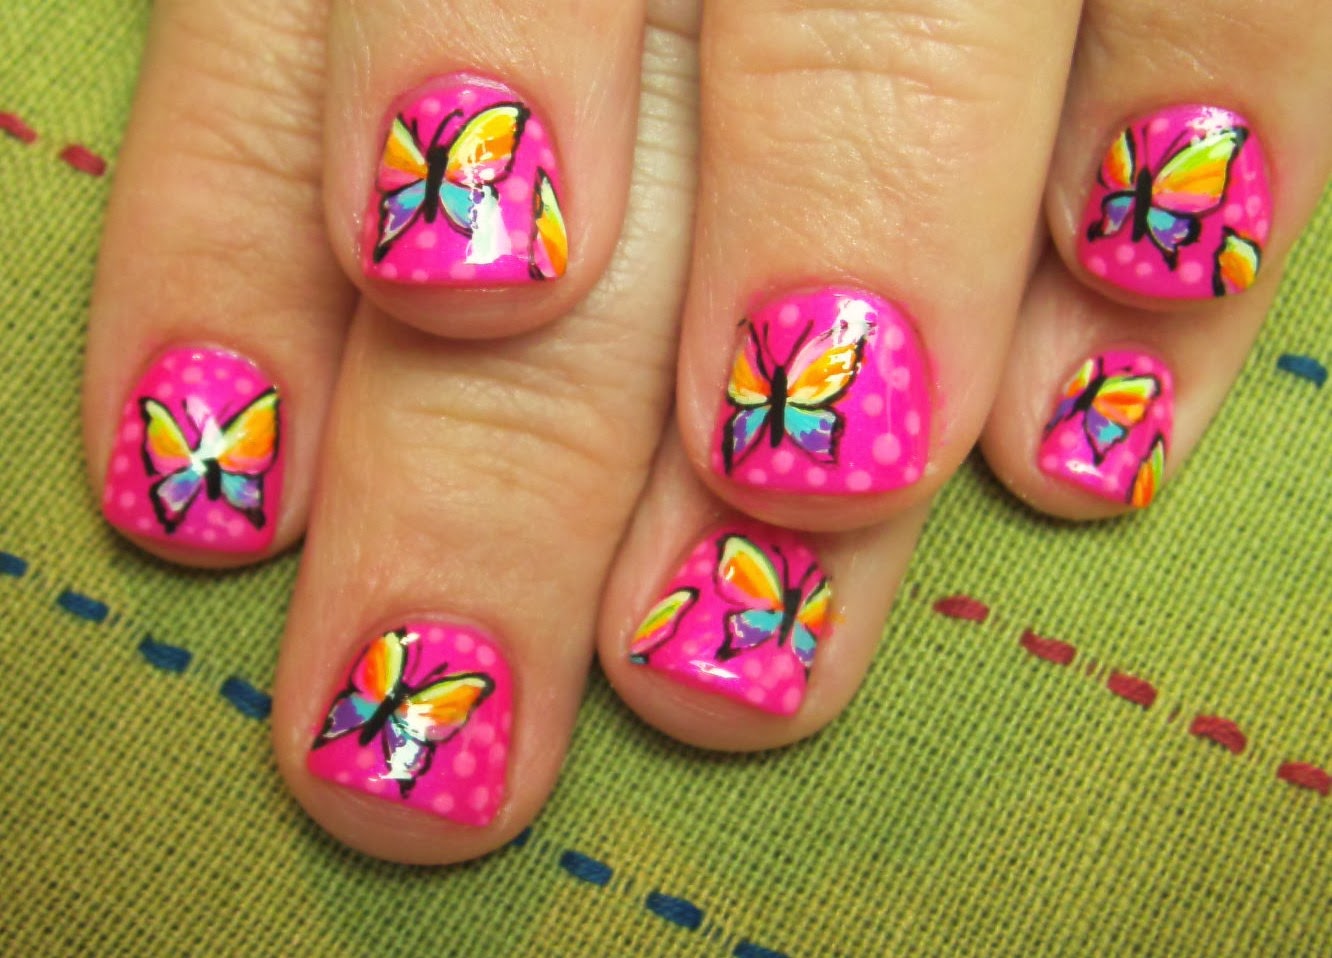 Butterfly Nail Art Designs for Short Nails - wide 6